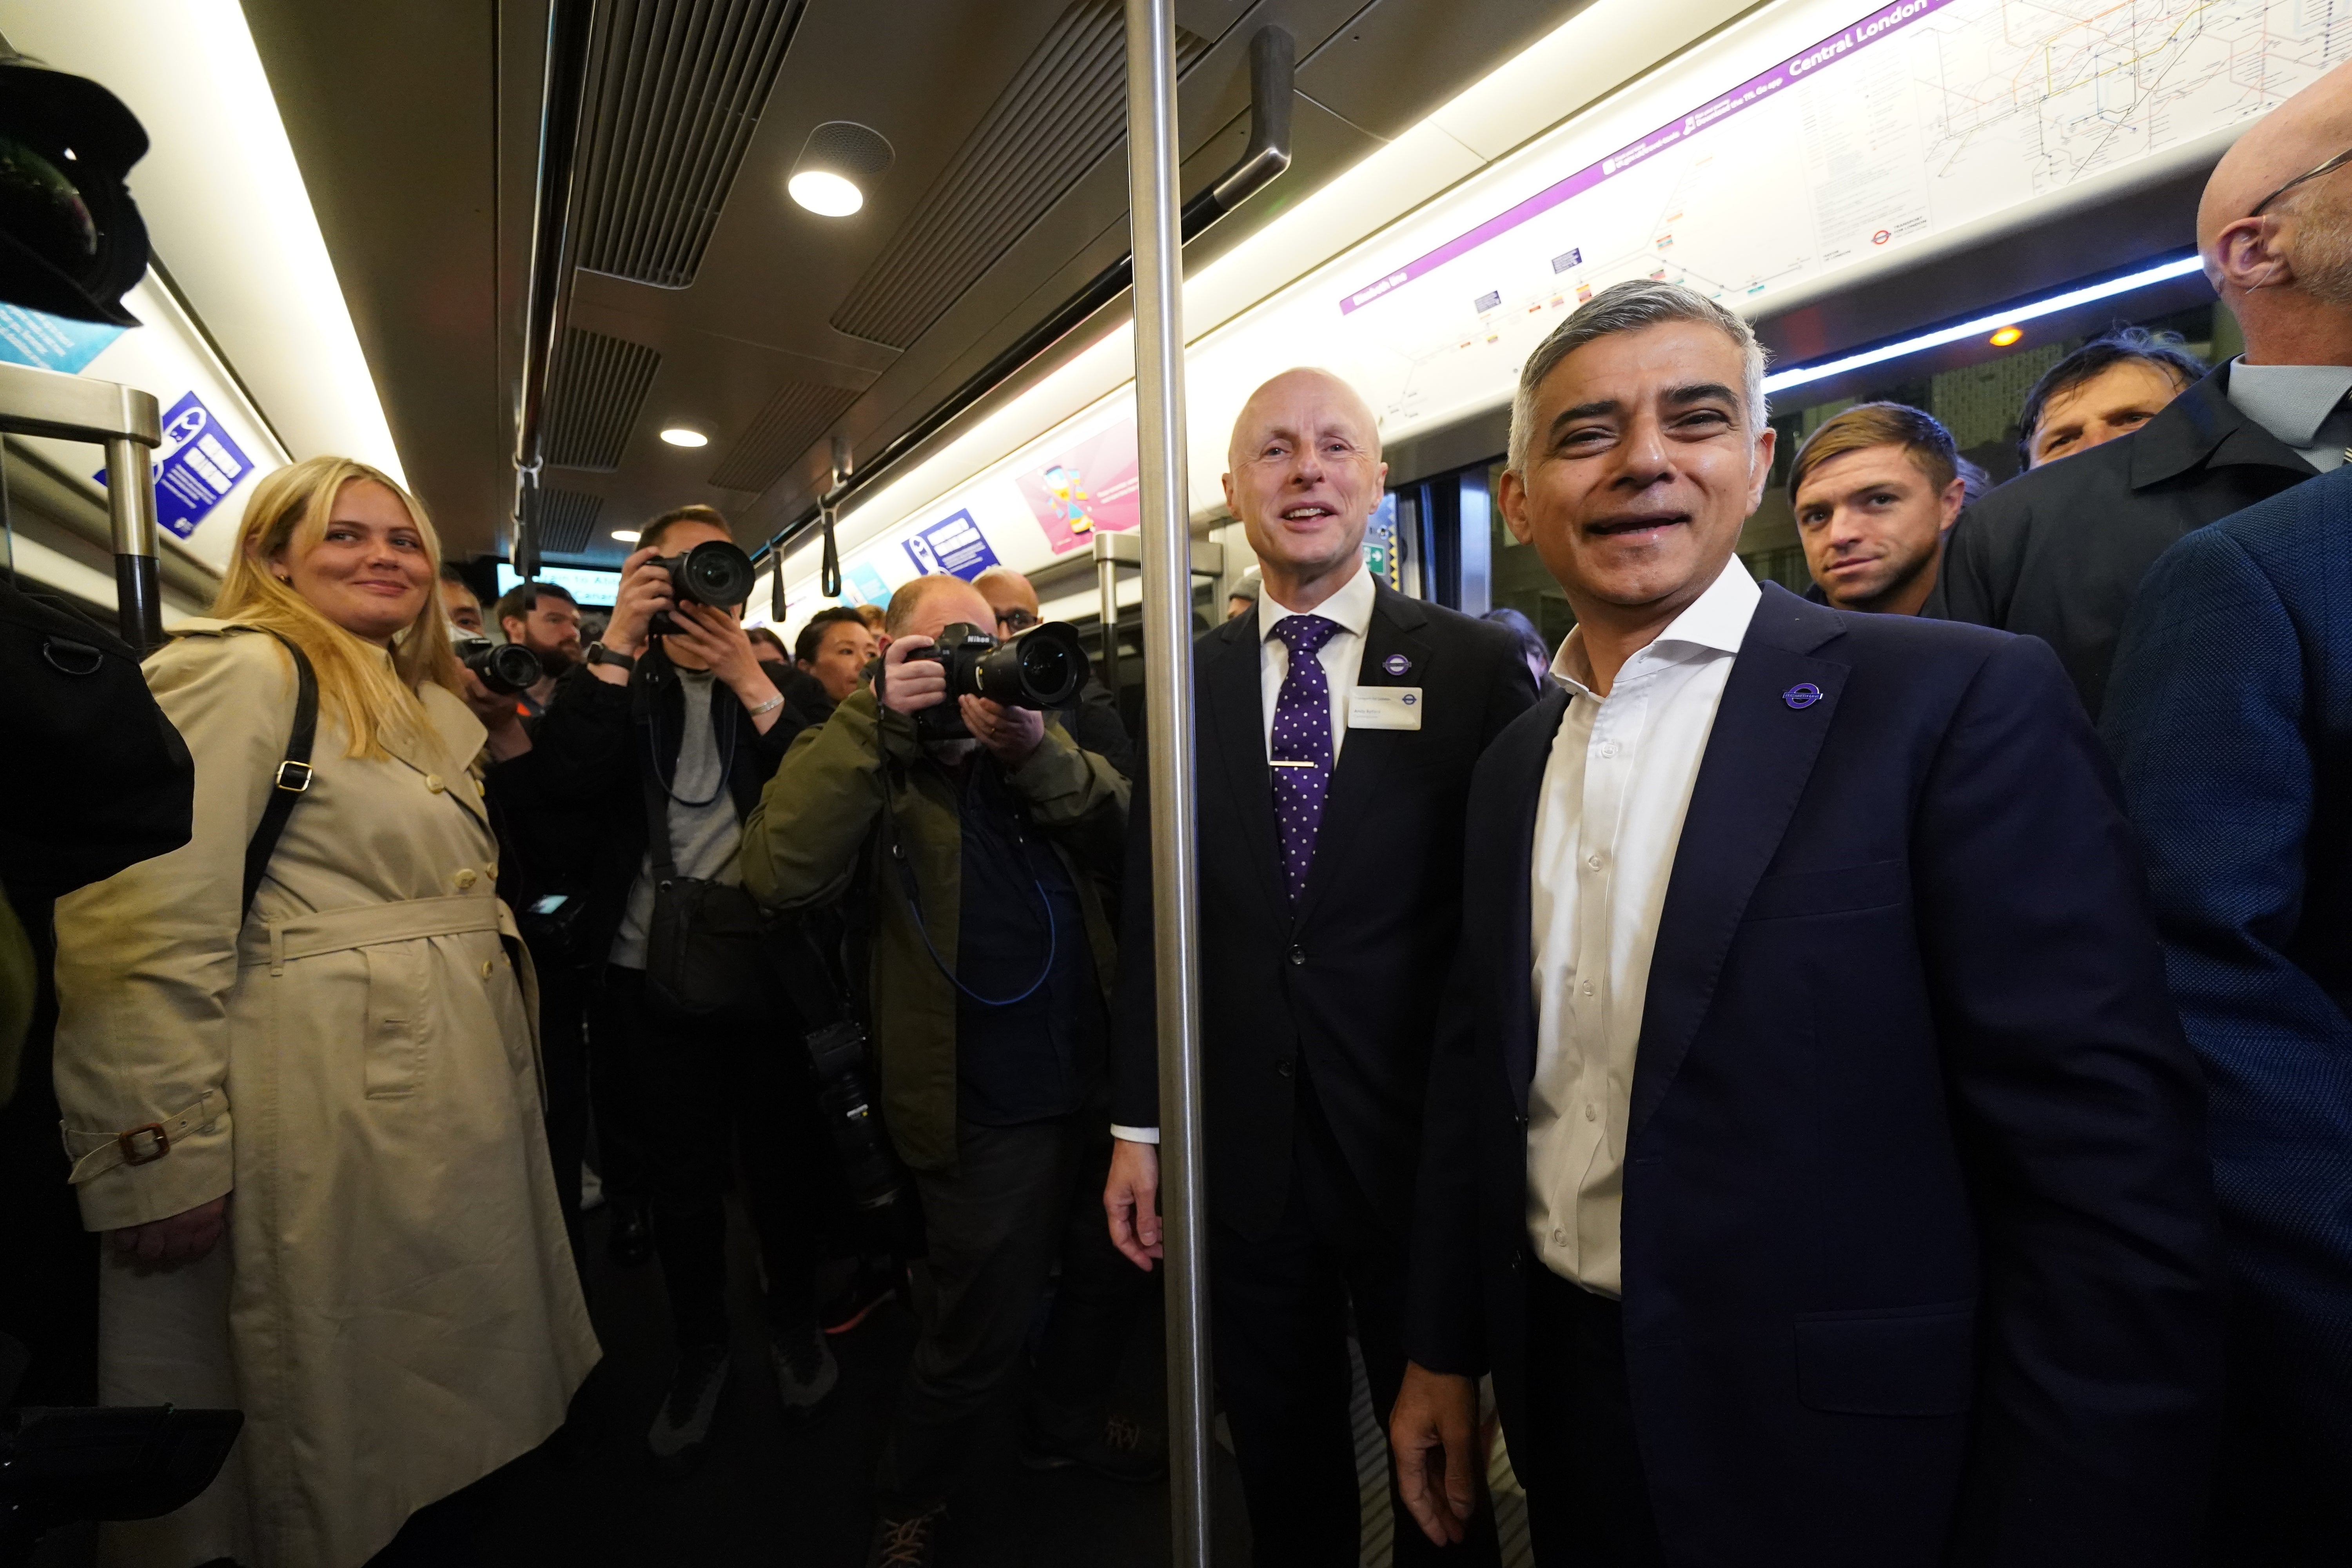 Mayor of London Sadiq Khan and Andy Byford, Commissioner at Transport for London, travel on the first Elizabeth line train to carry passengers at Paddington Station (Kirsty O’Connor/PA)